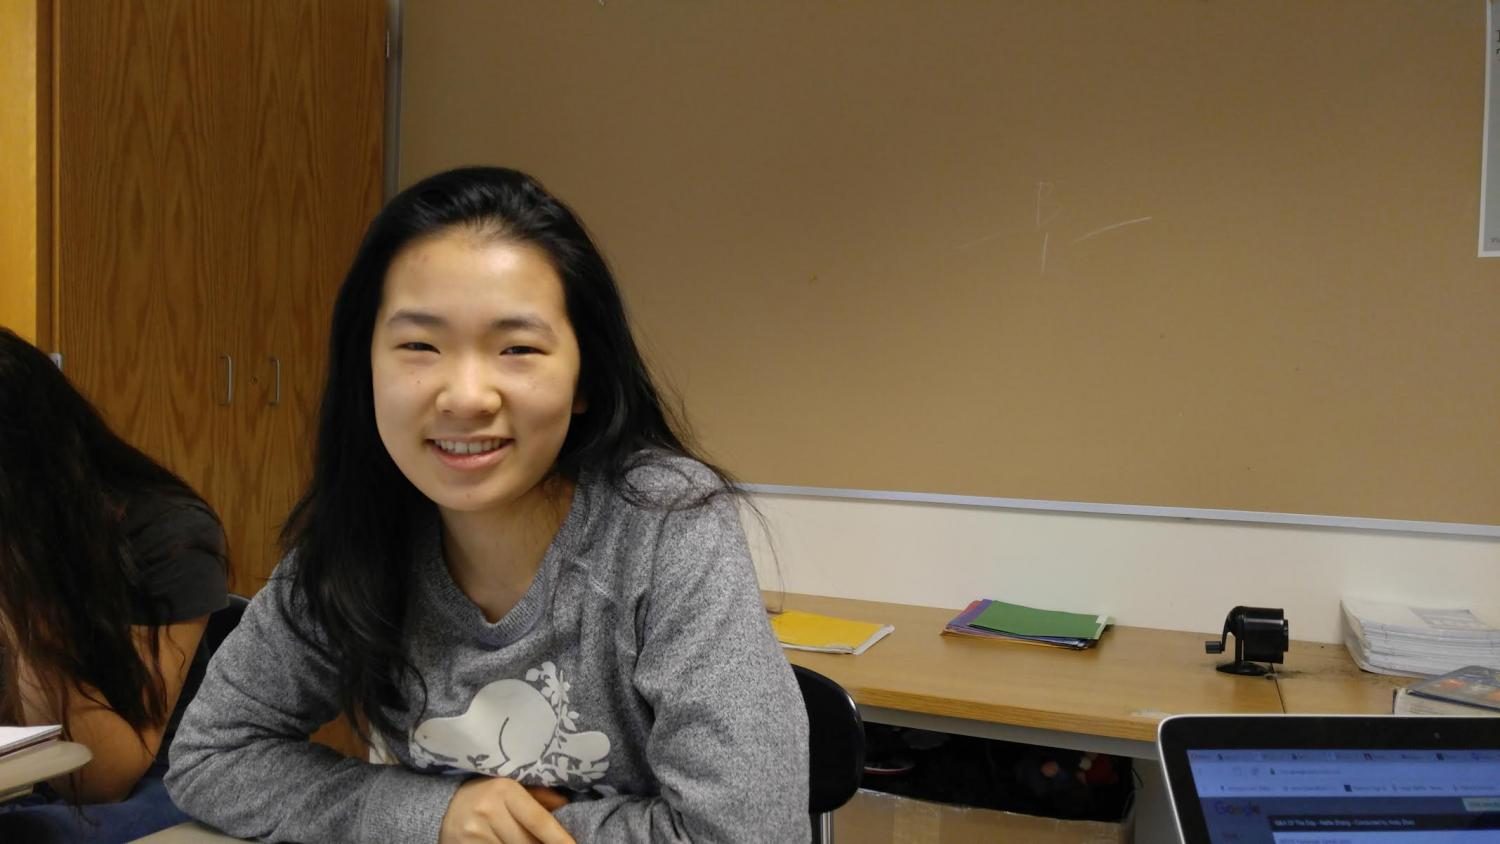 Sophomore Tuesday: Nellie Zhang